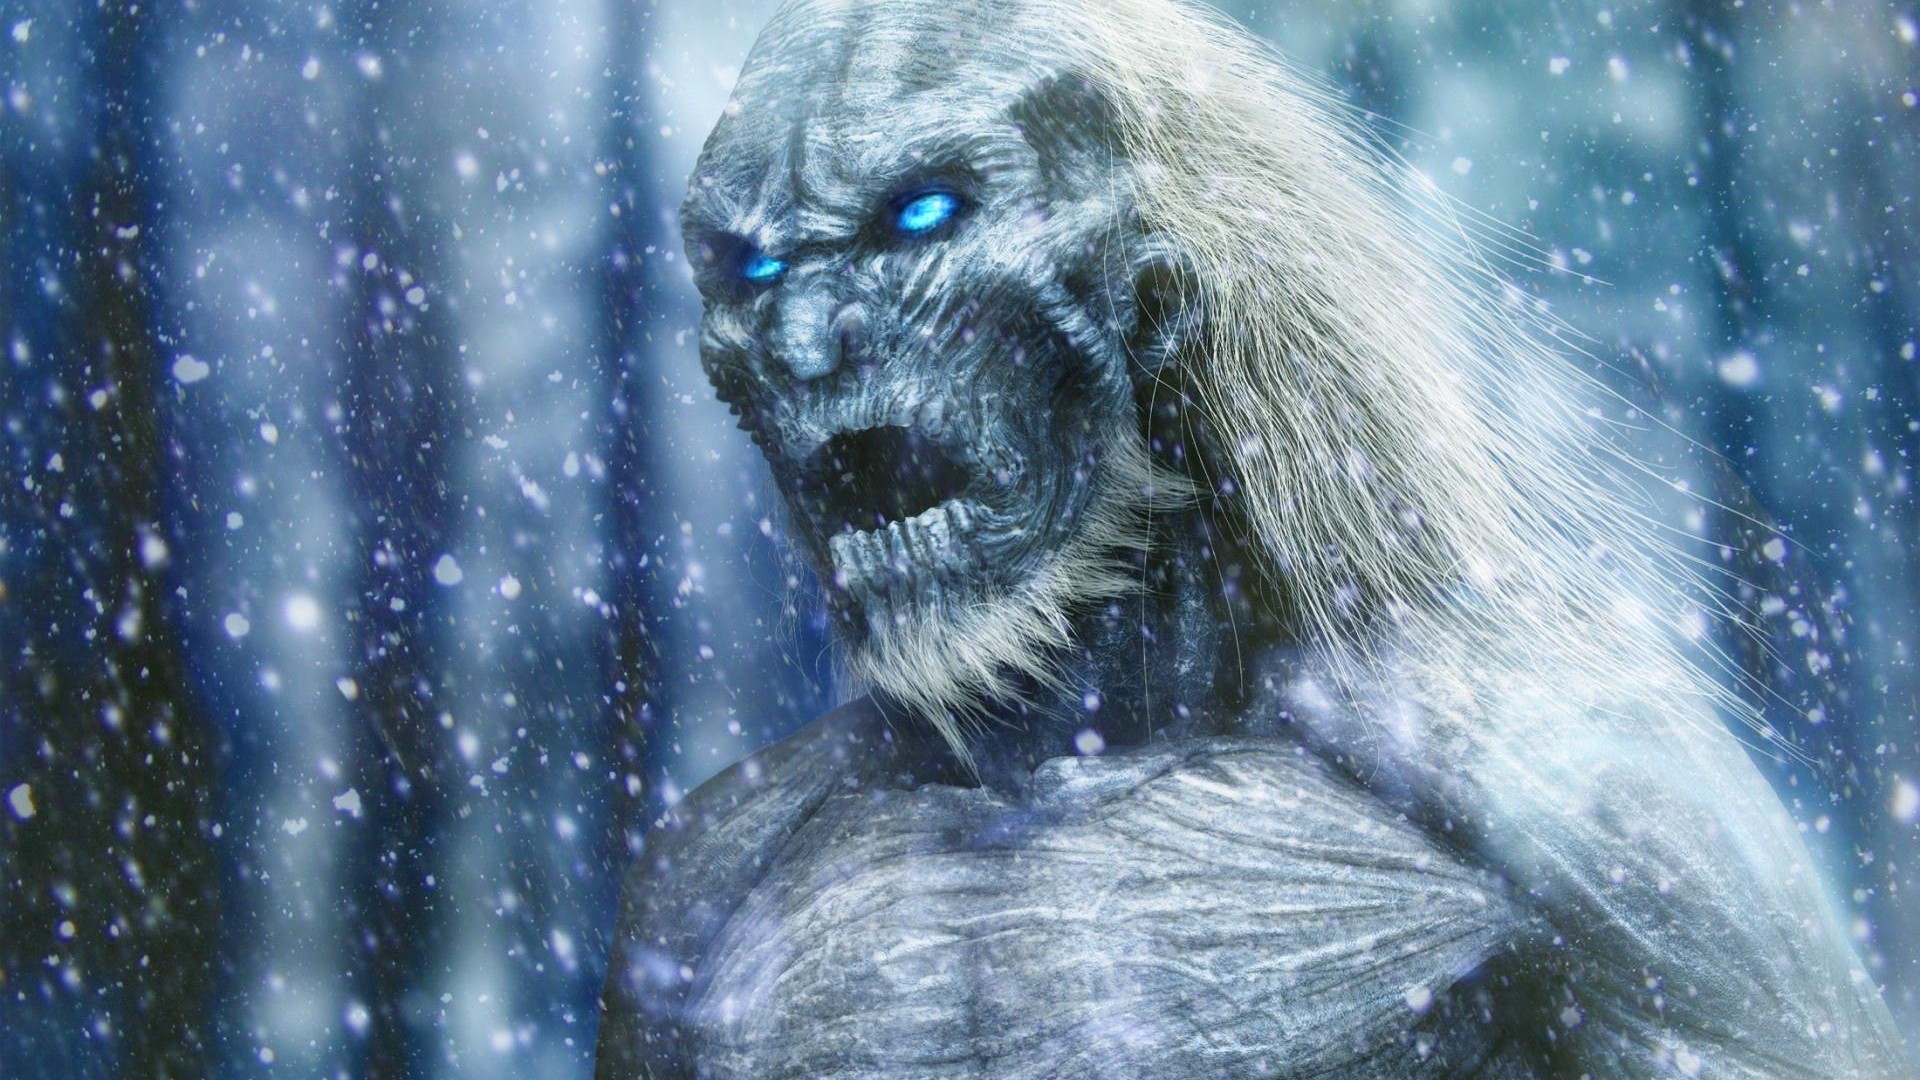 Download game of thrones white walkers wallpaper HD wallpaper